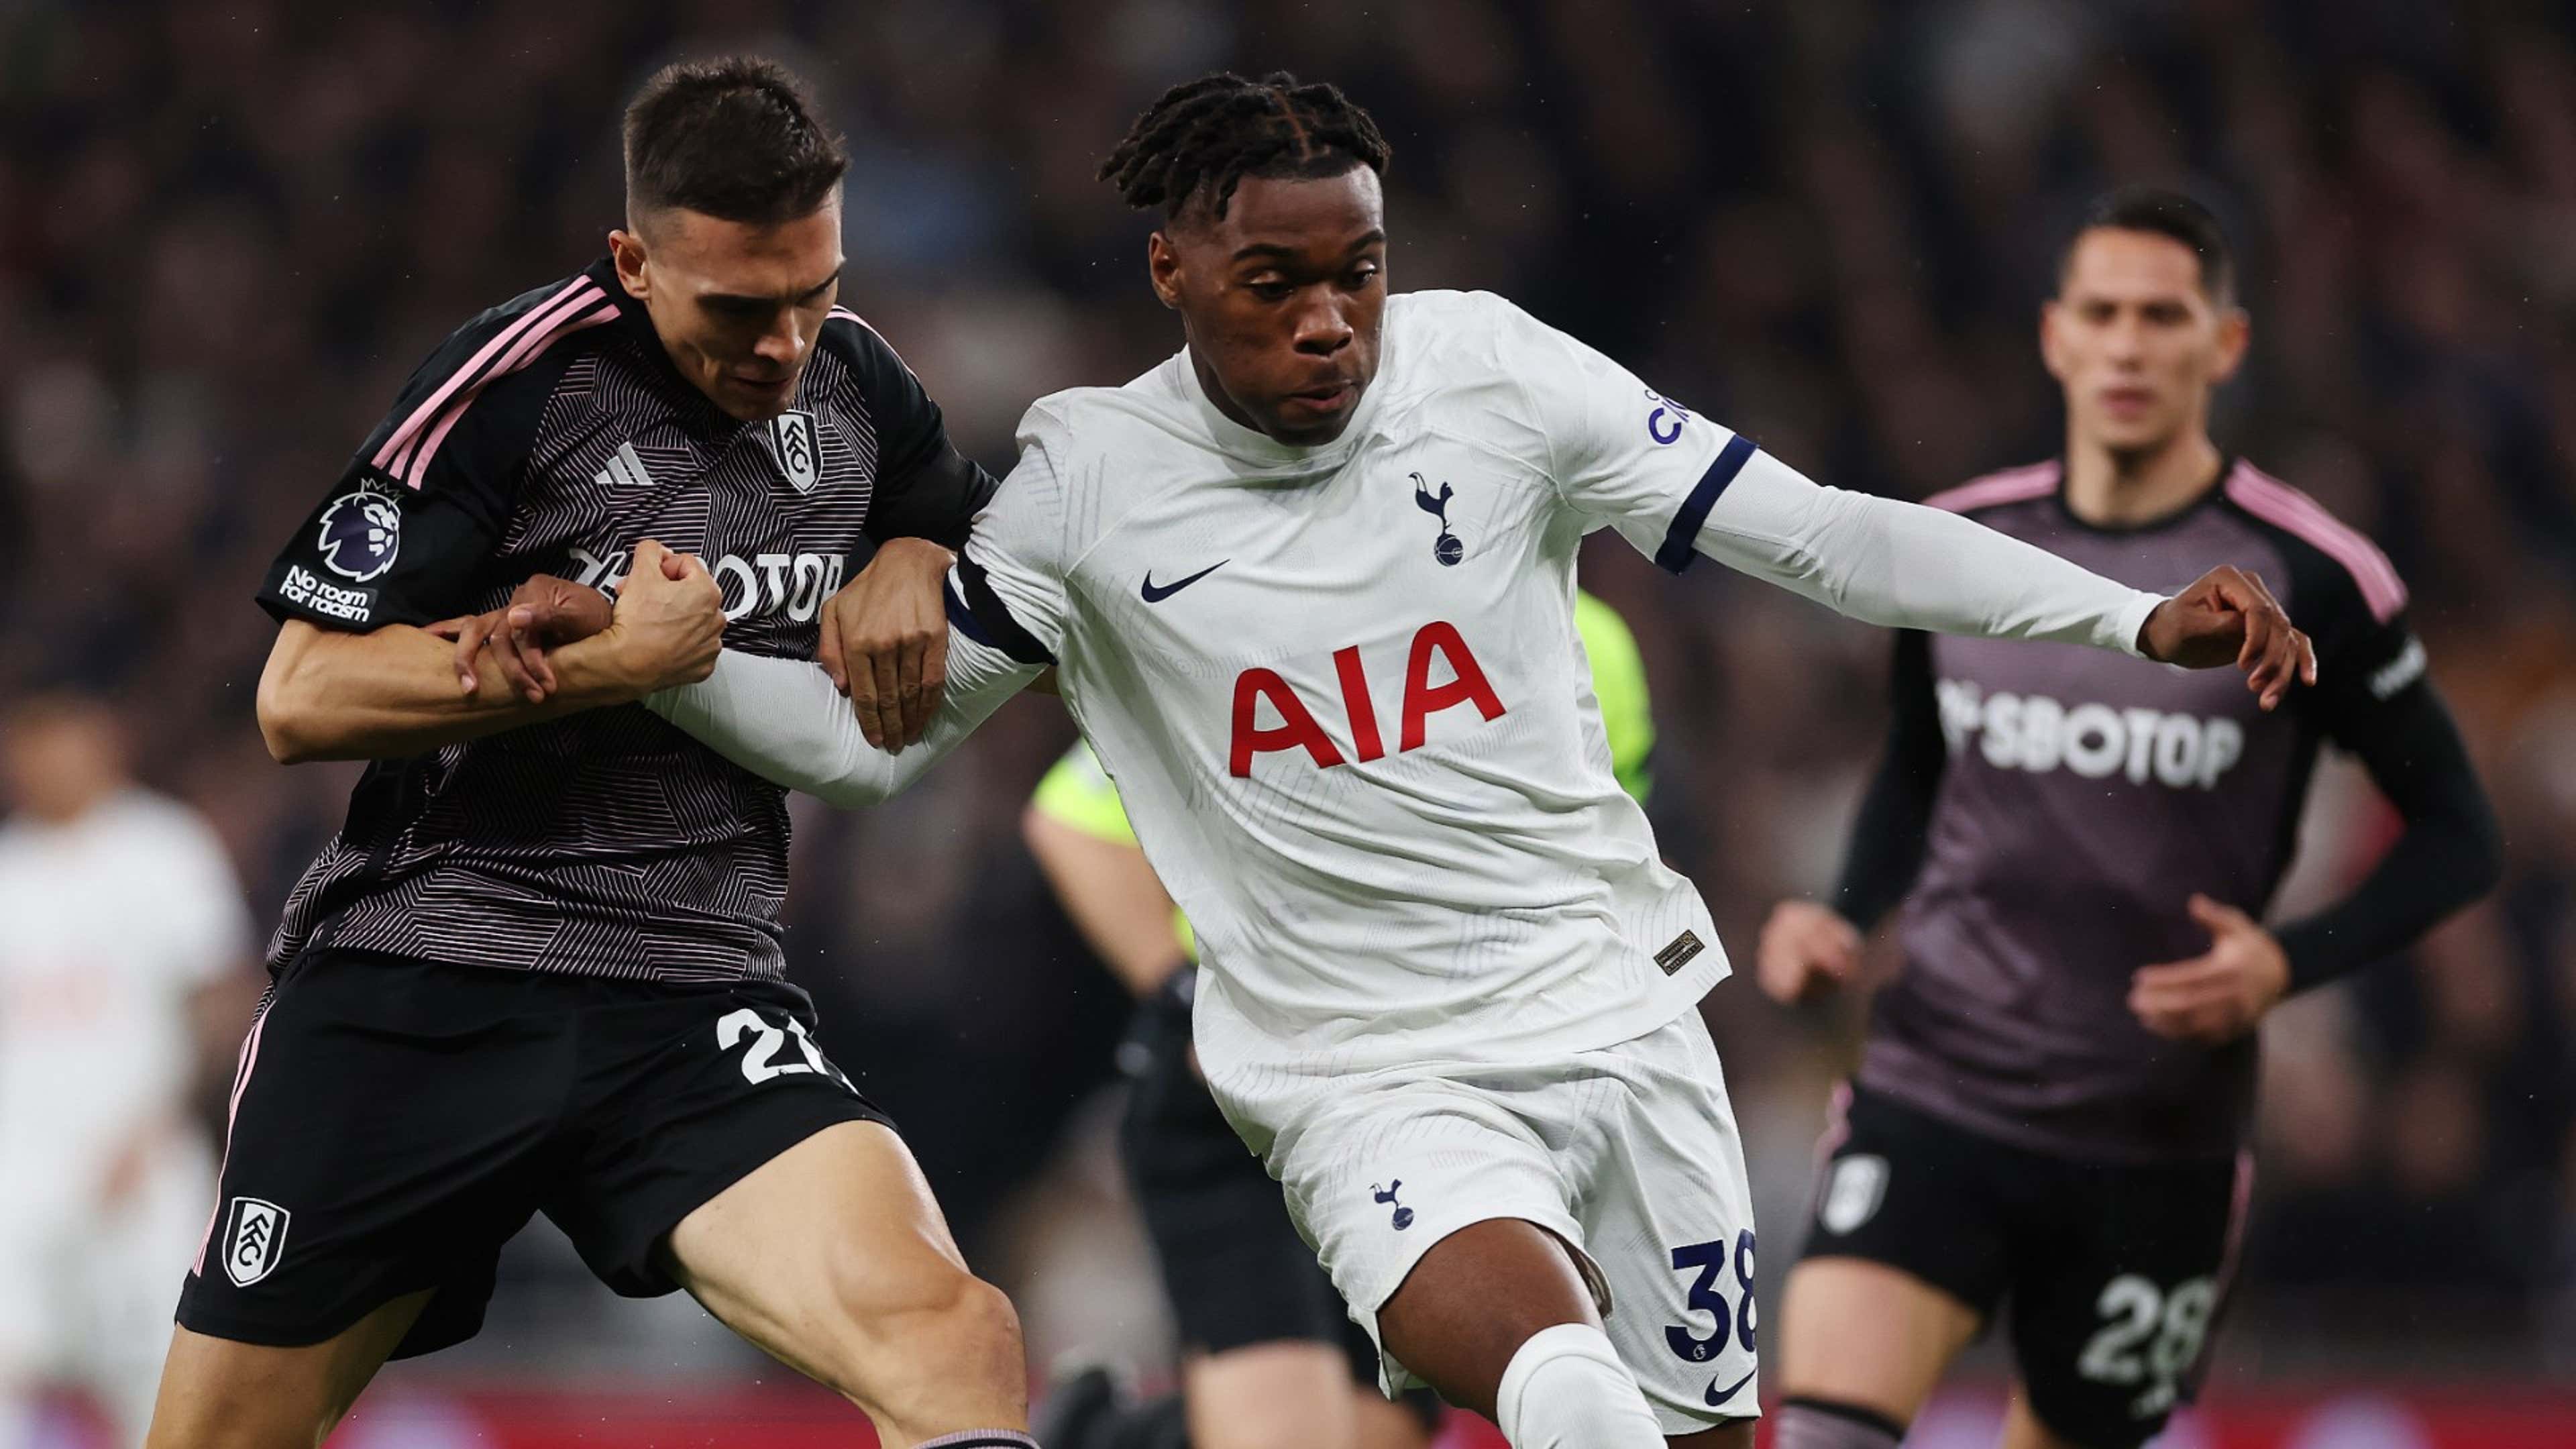 Skipp's super strike helps Spurs to a rare win over Chelsea